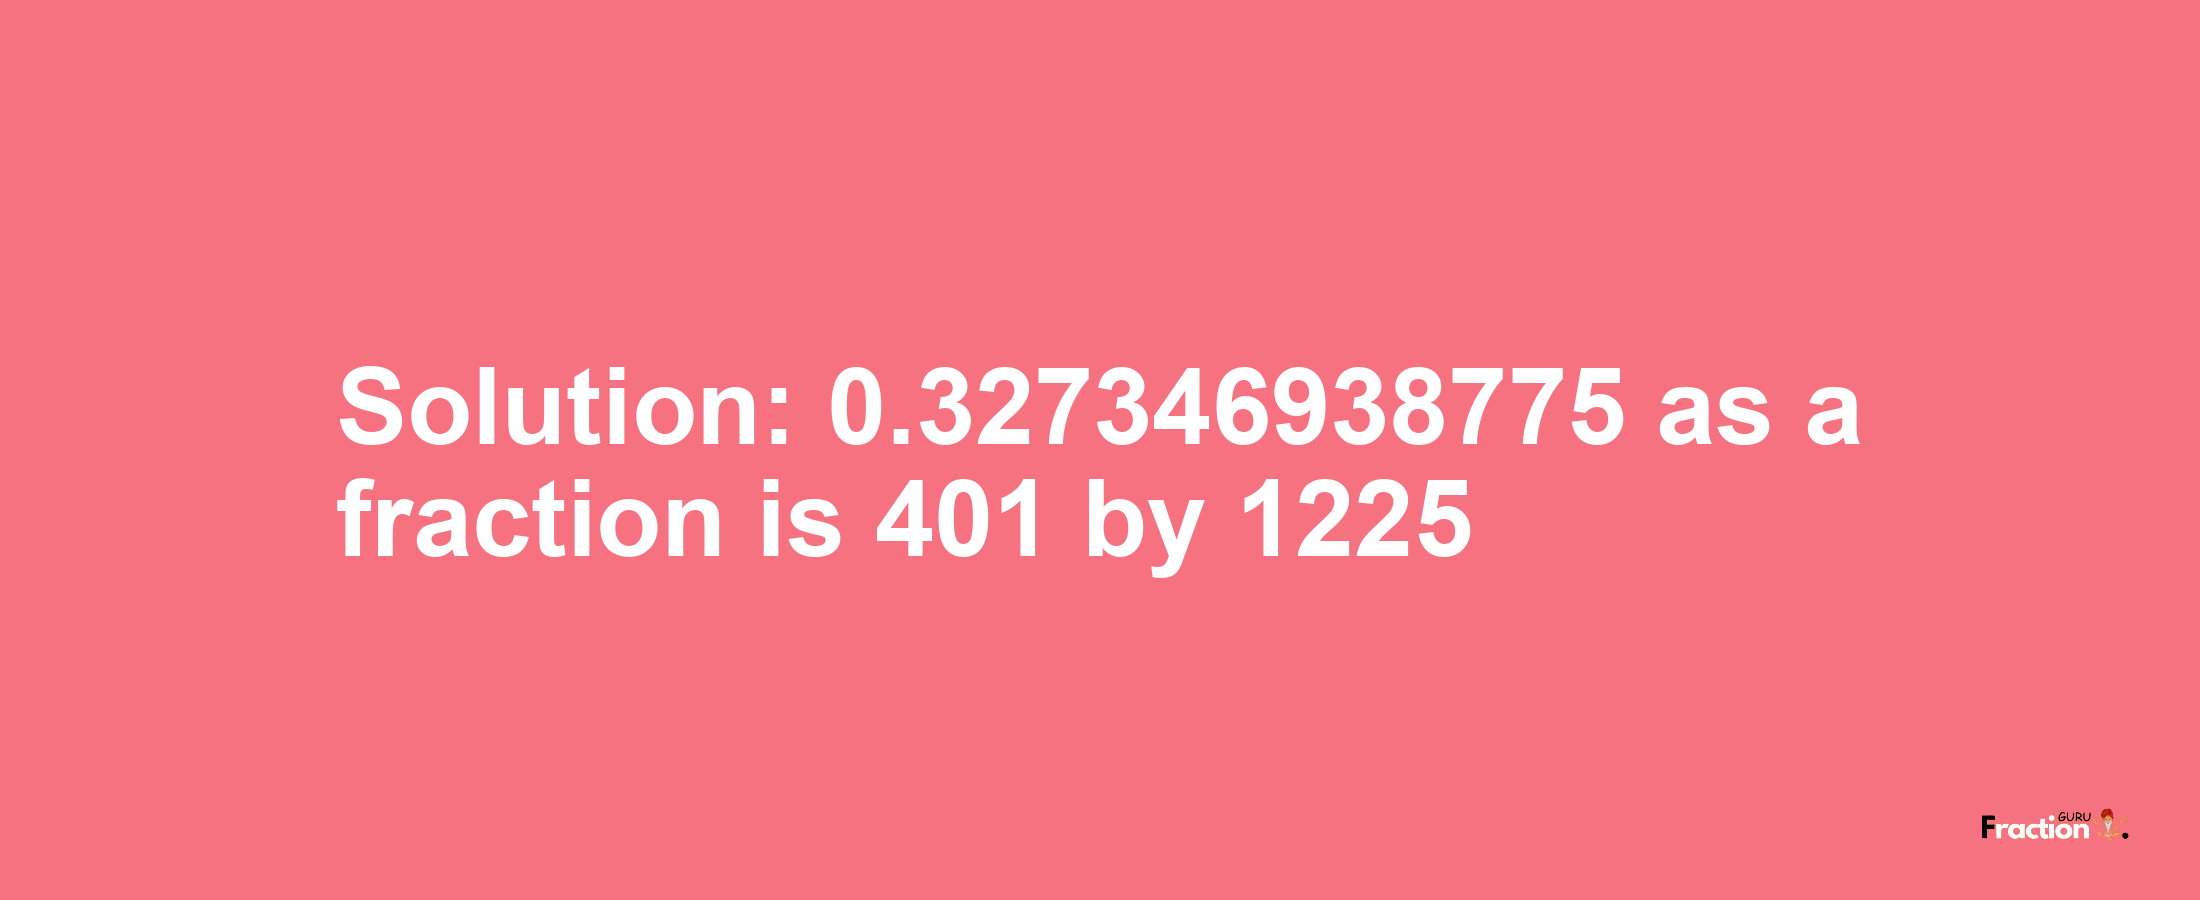 Solution:0.327346938775 as a fraction is 401/1225